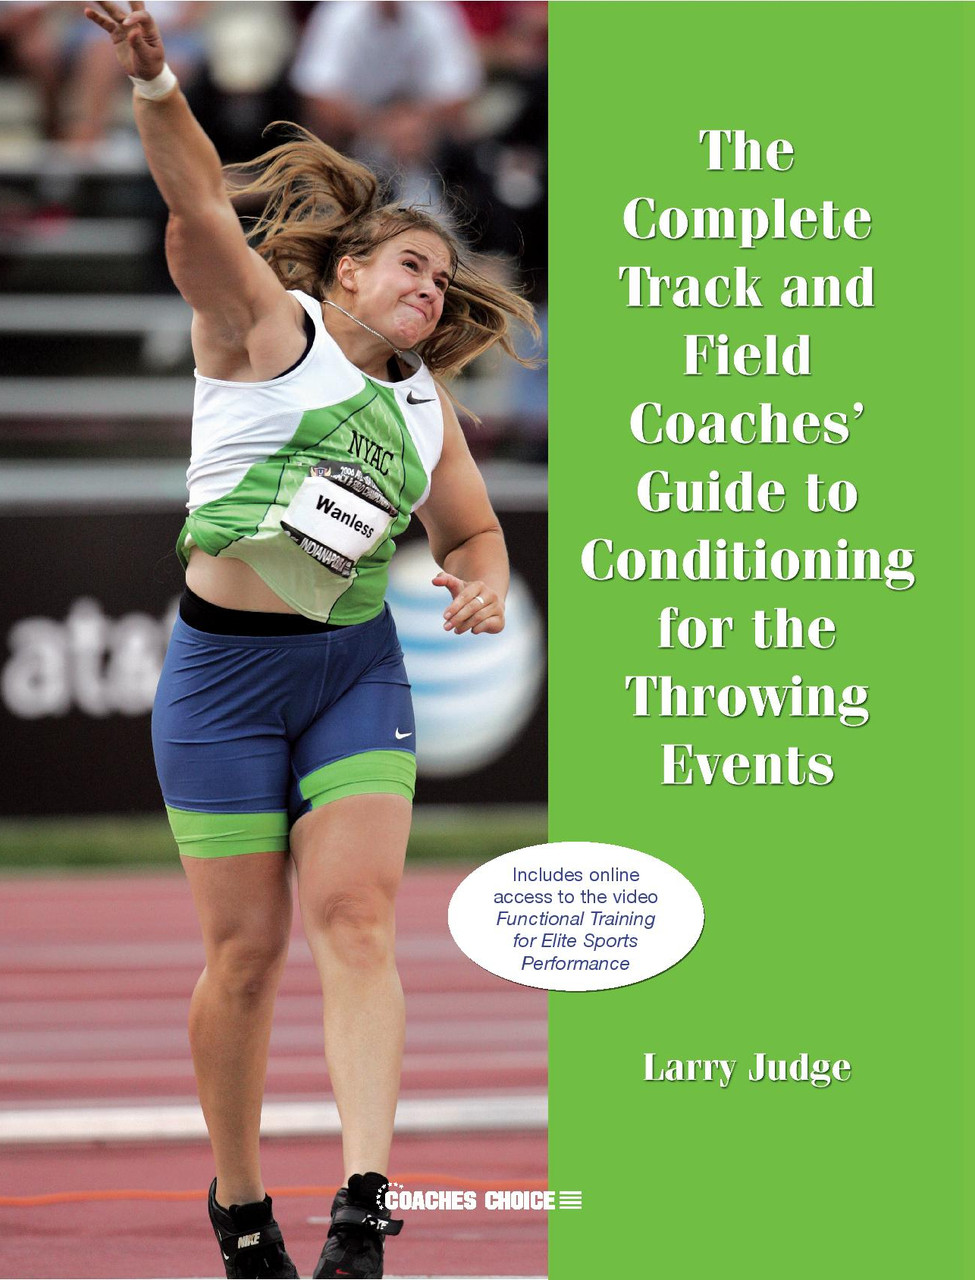 Advanced Conditioning for the Throwing Events